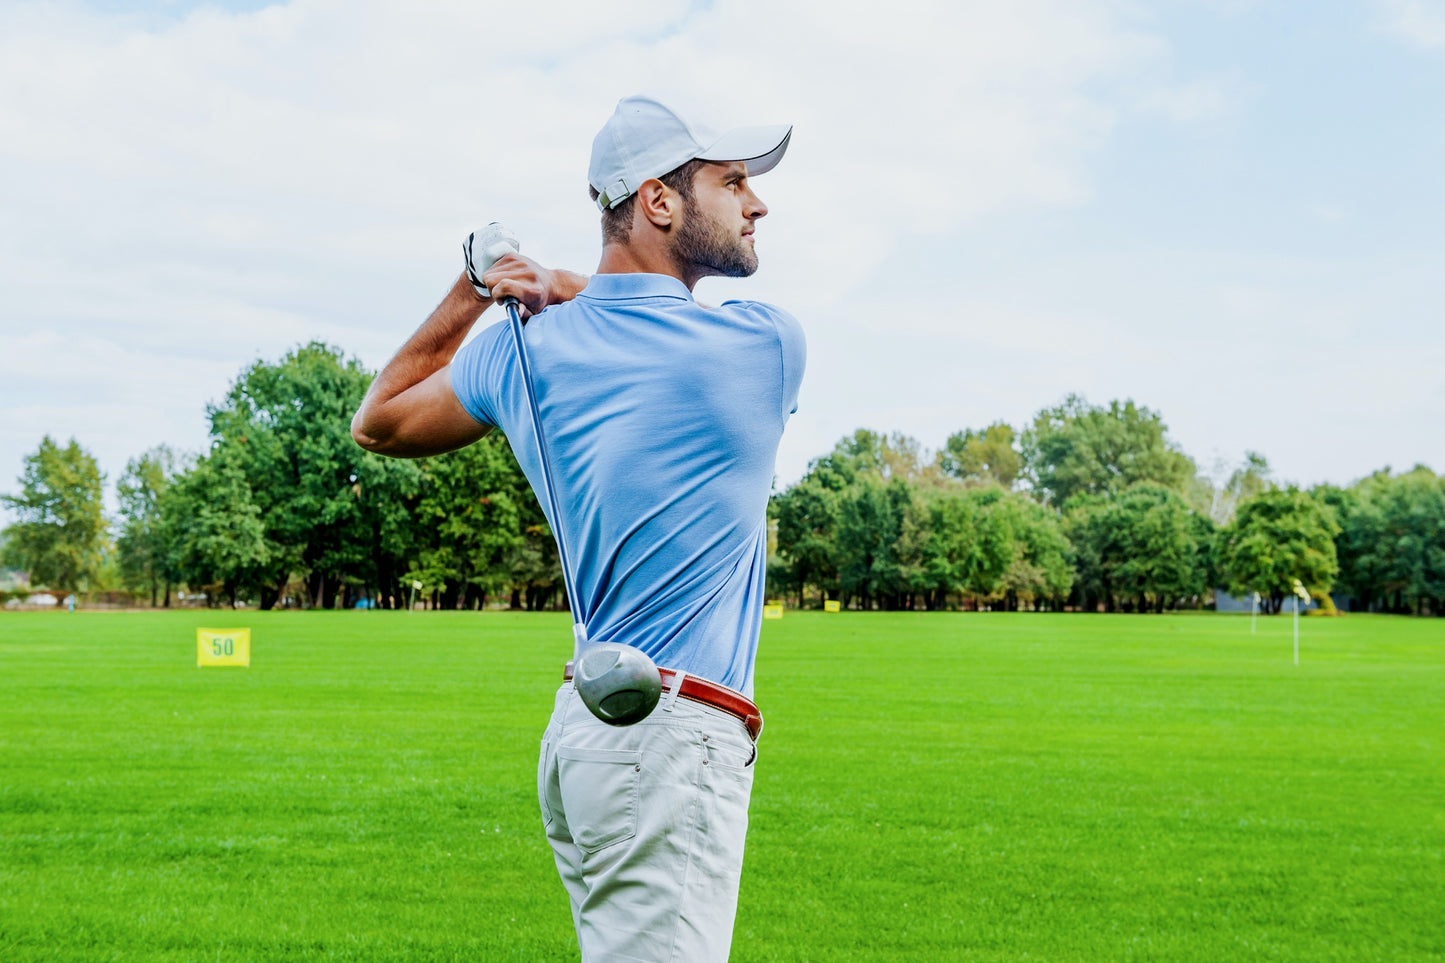 Fitness Certification Online I Golf Fitness Pro – ASFA